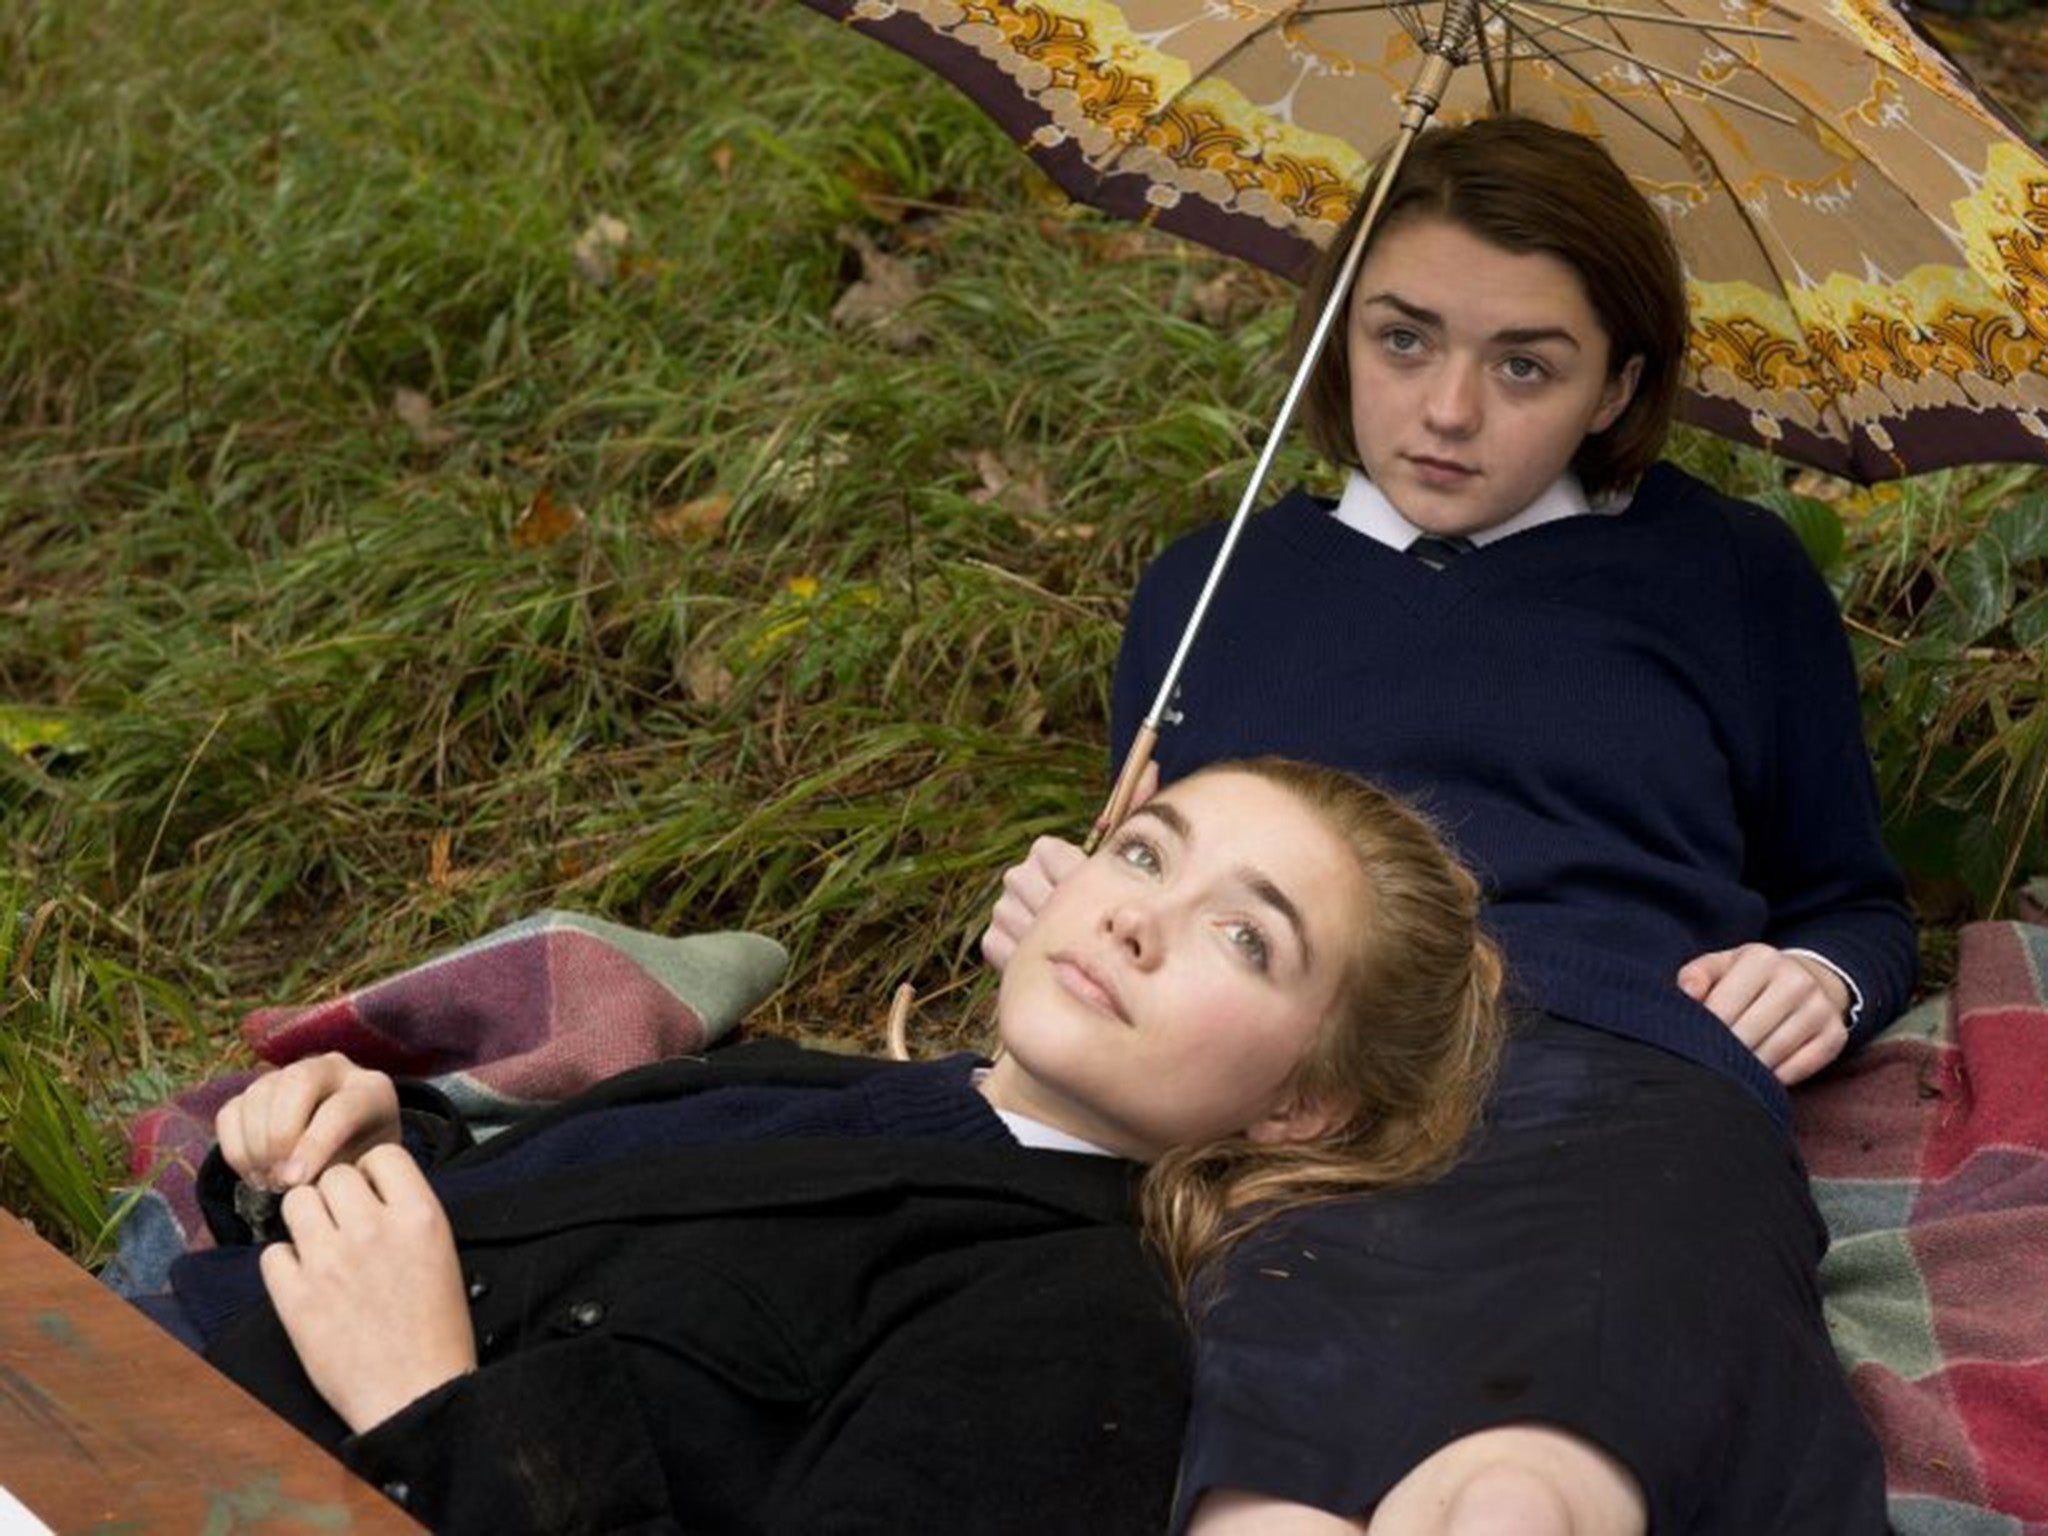 Maisie and Florence in The Falling